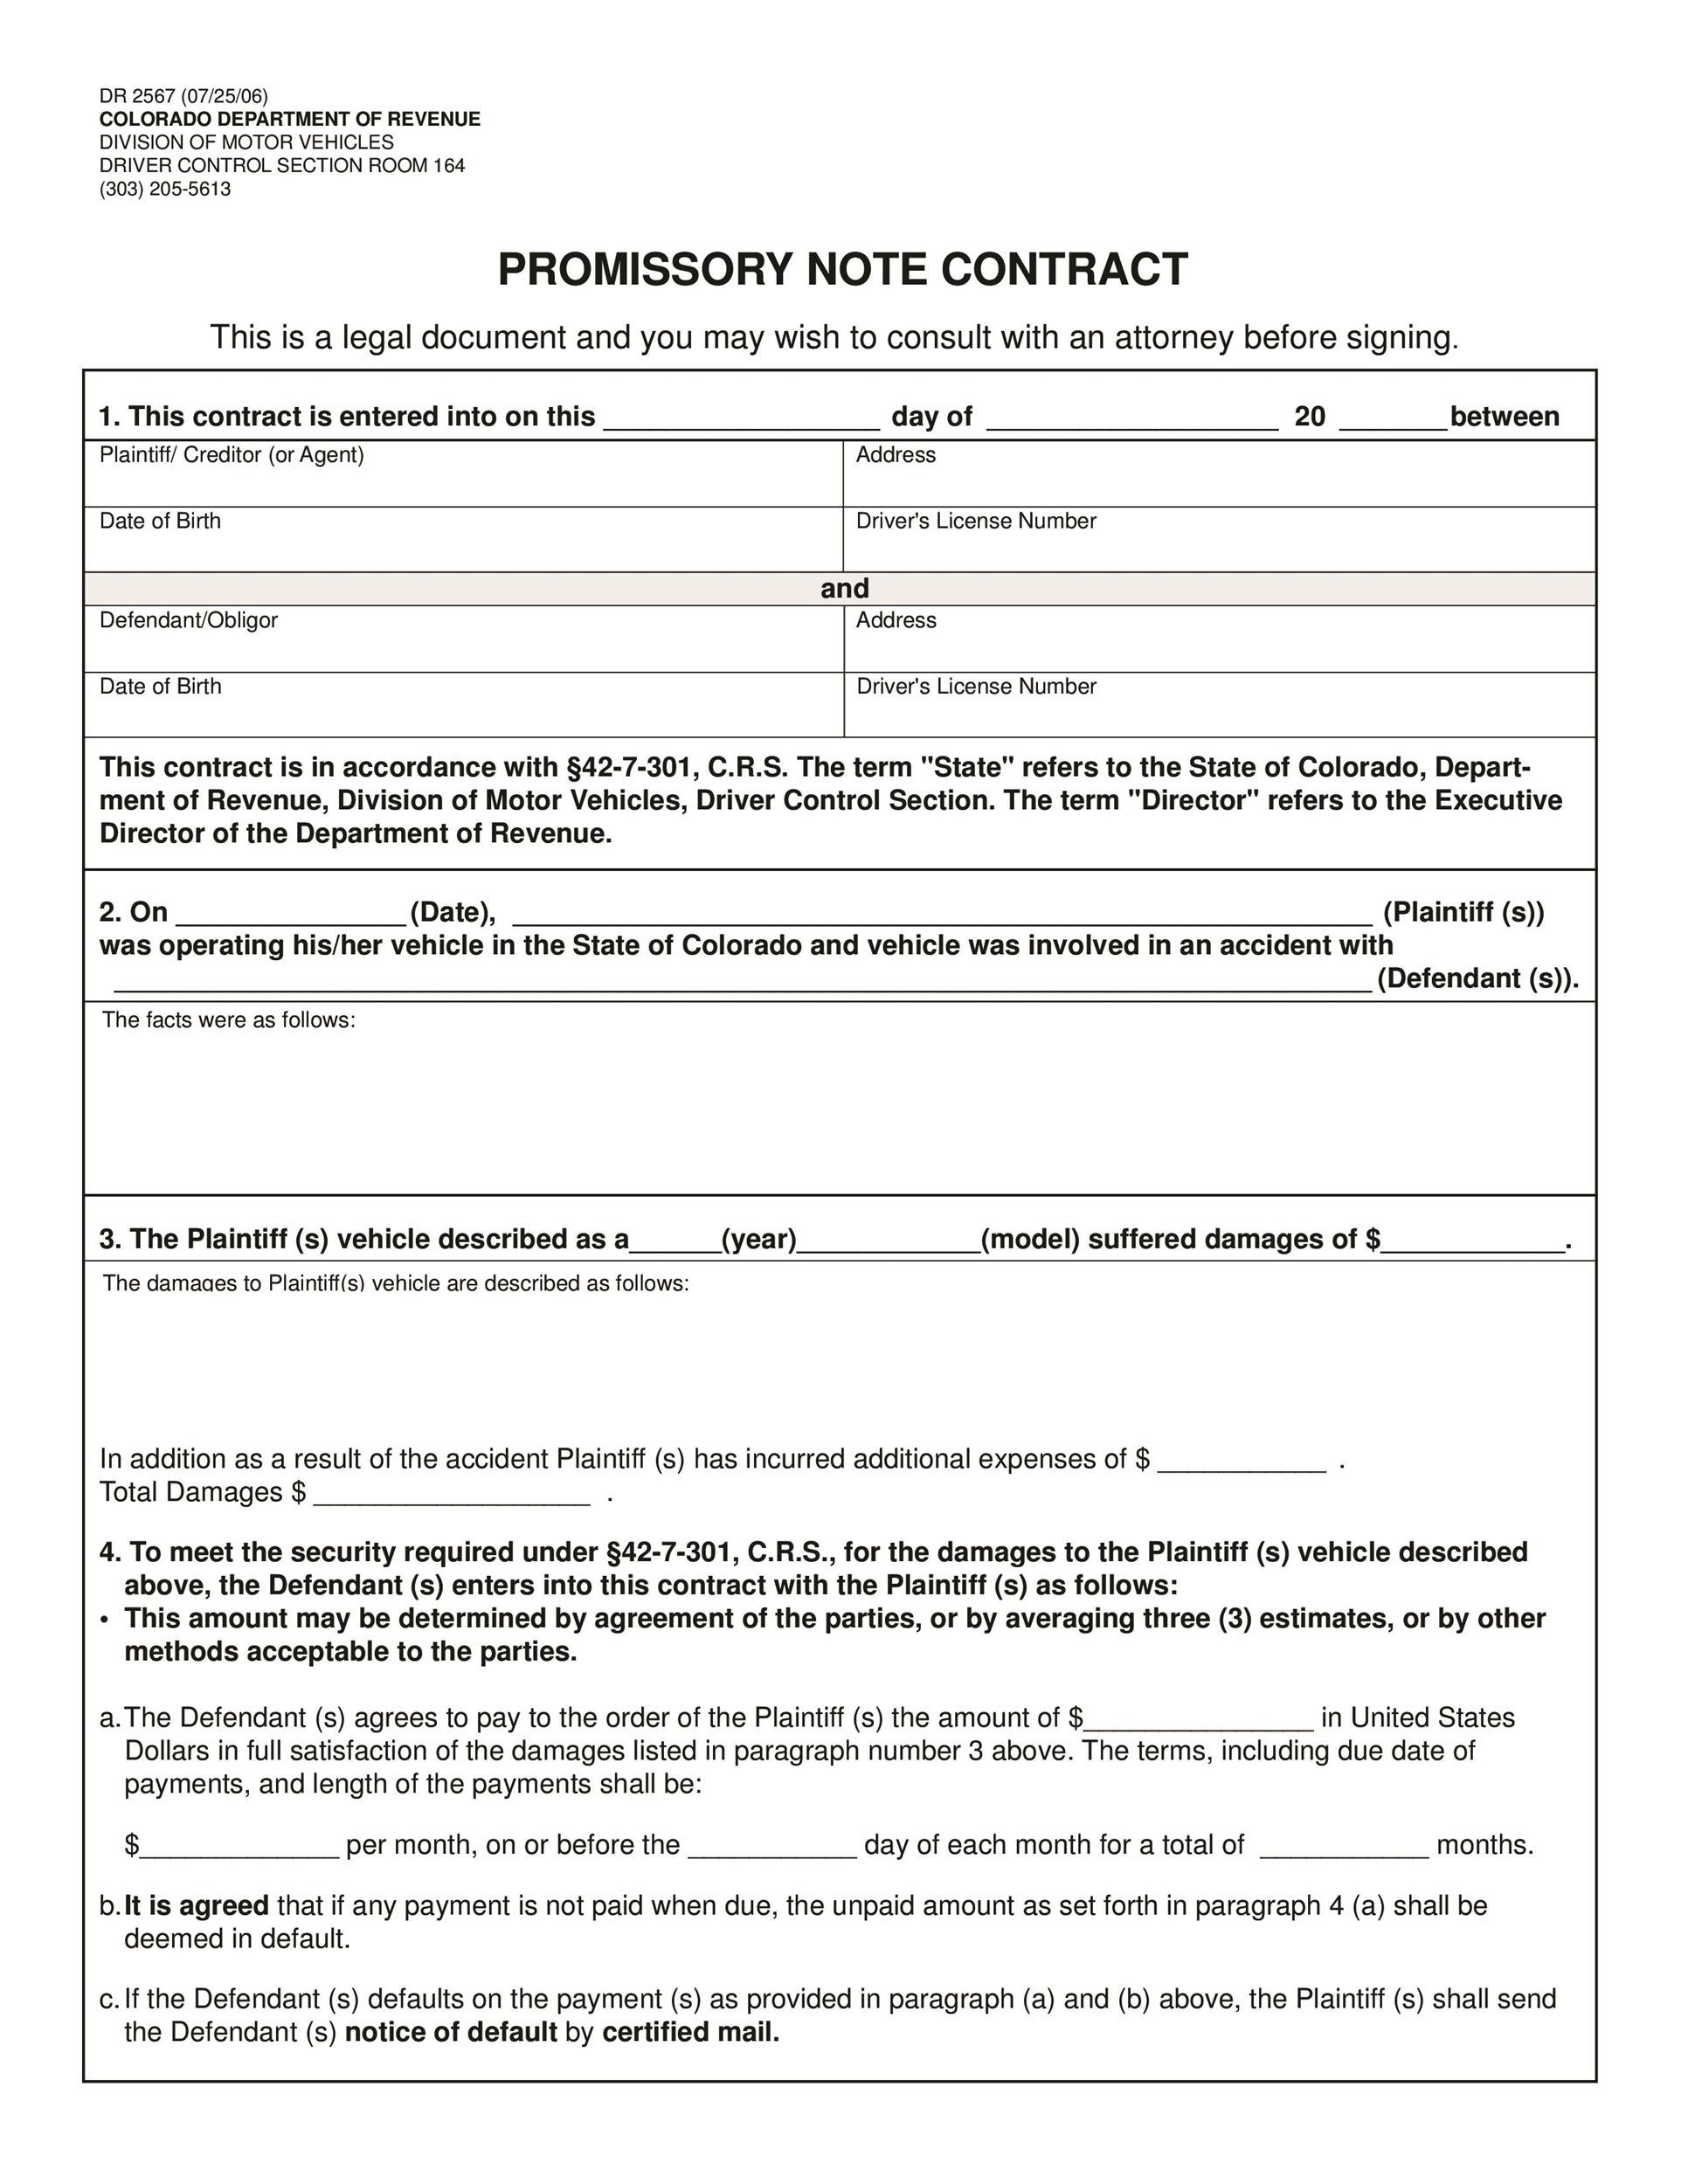 45 FREE Promissory Note Templates & Forms [Word & PDF] Template Lab